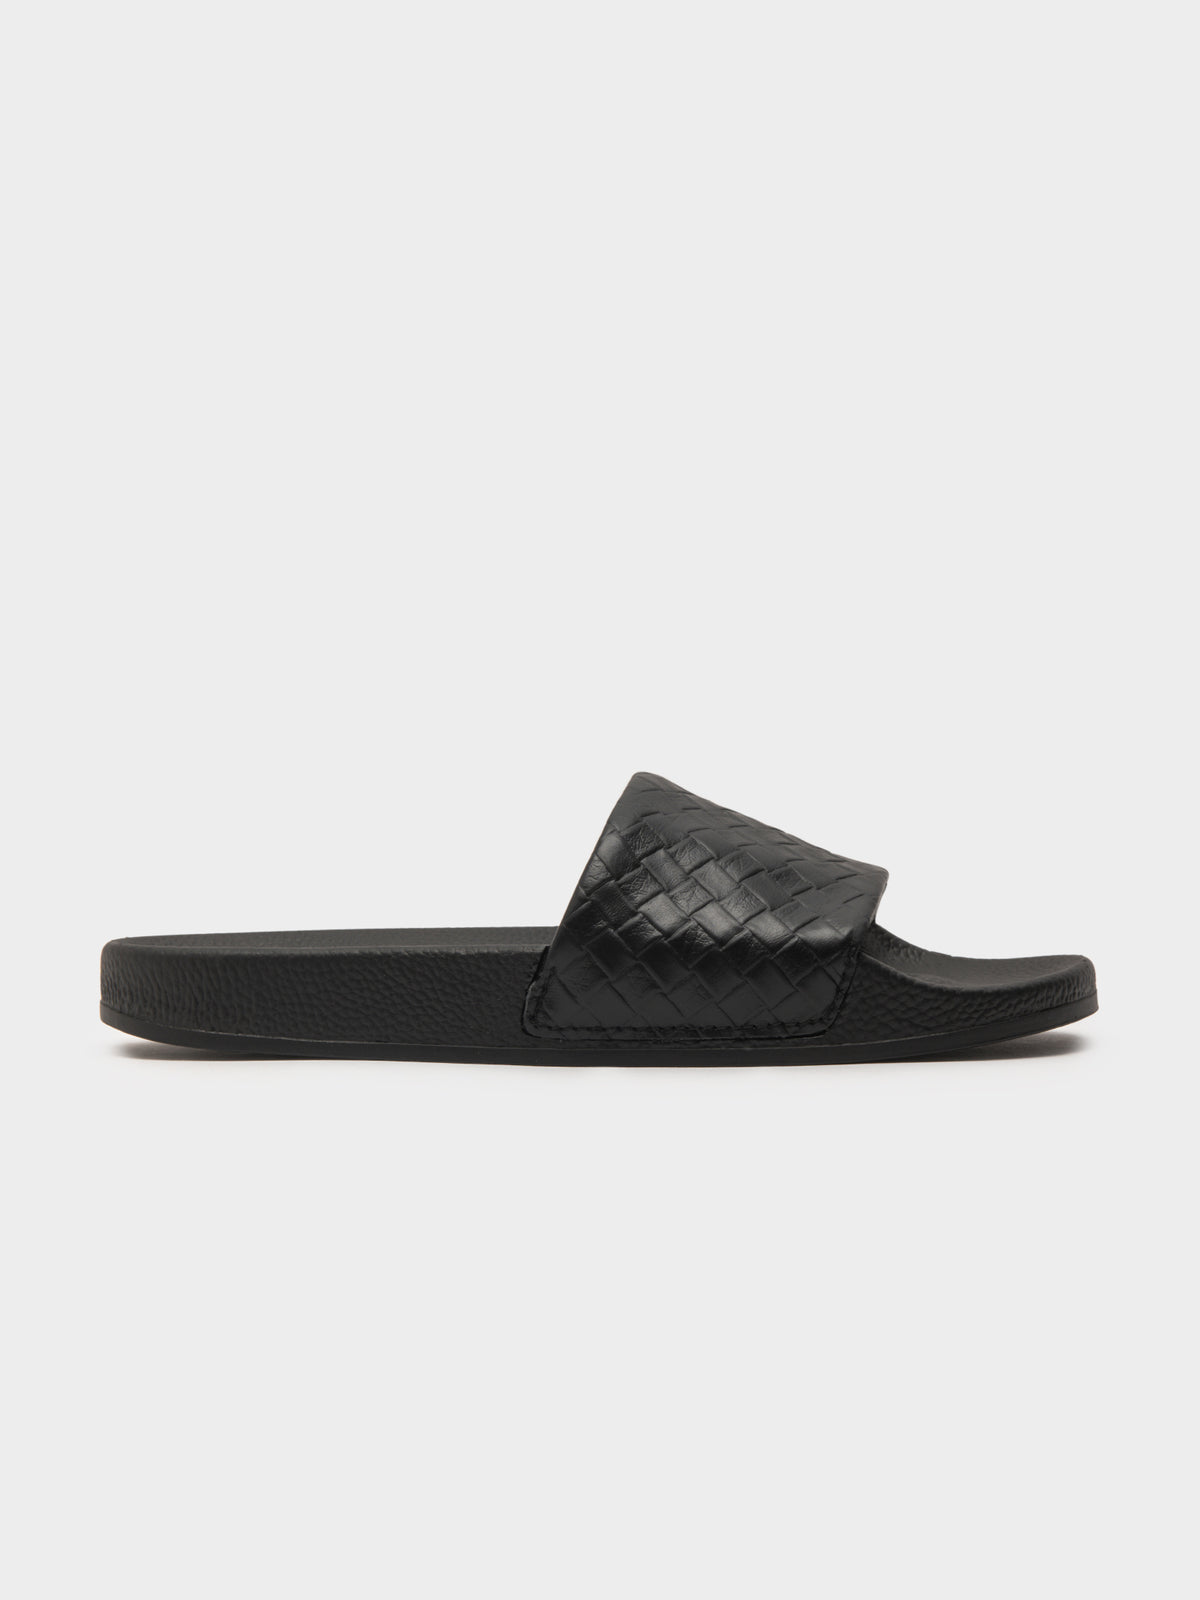 Womens 1908 Woven Leather Slides in Black